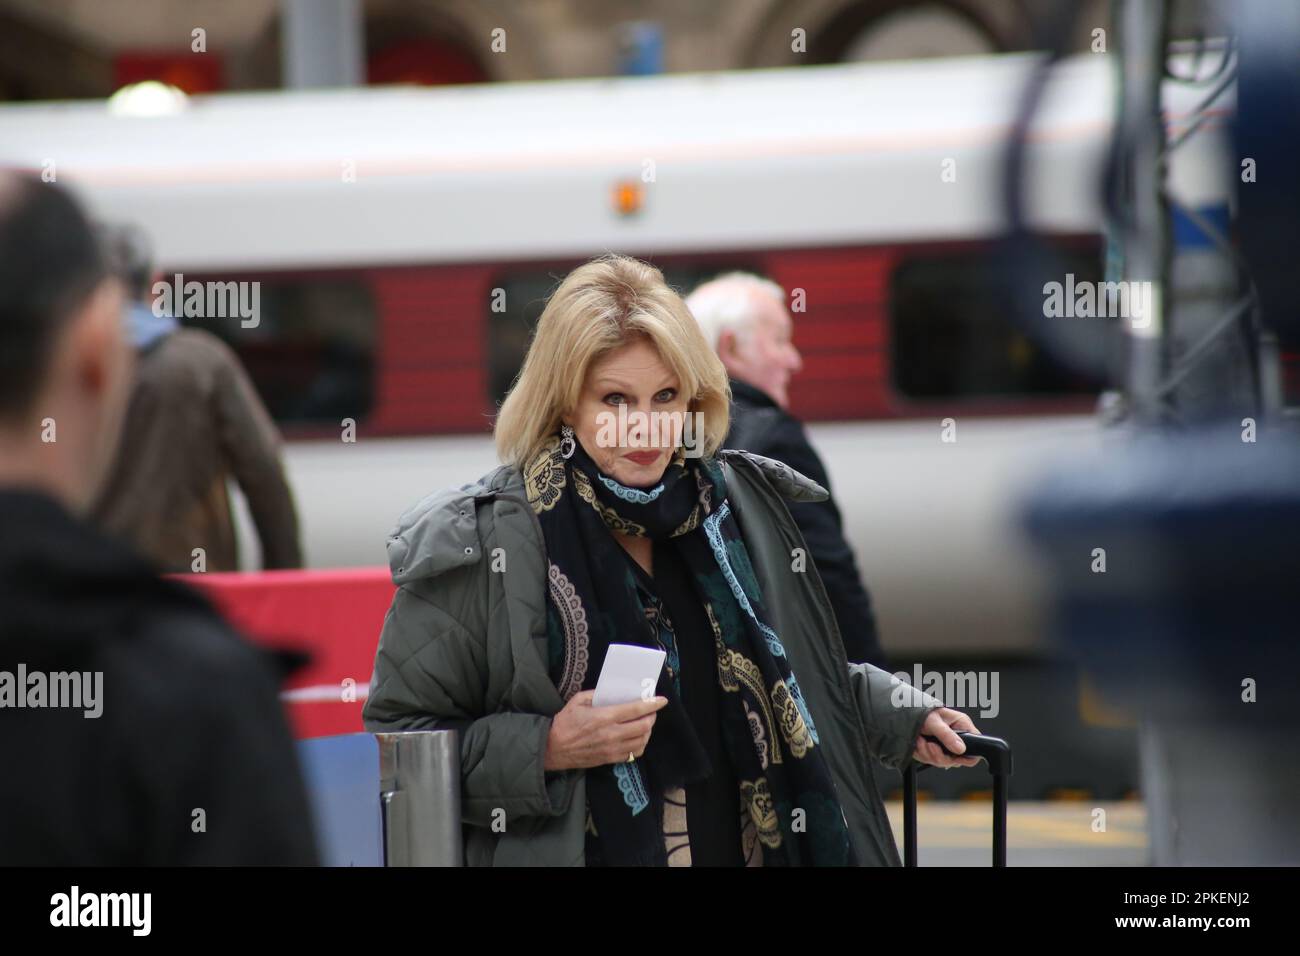 Newcastle upon Tyne, 7th April 2023, Dame Joanna Lumley seen at Newcastle train station, The British actress,  presenter, former model, author. Dame Joanna known for her TV roles as Patsy Stone in The Absolutely Fabulous, Purdey The New Avengers and Sapphire & Steel was visiting Gateshead near Newcastle upon Tyne for an exclusive Q&A about her life and career talking about her book 'A Queen for All Seasons' at the opening of British furniture retailer Barker and Stonehouse opens its new flagship store in Gateshead, Credit:DEW/Alamy Live News Stock Photo